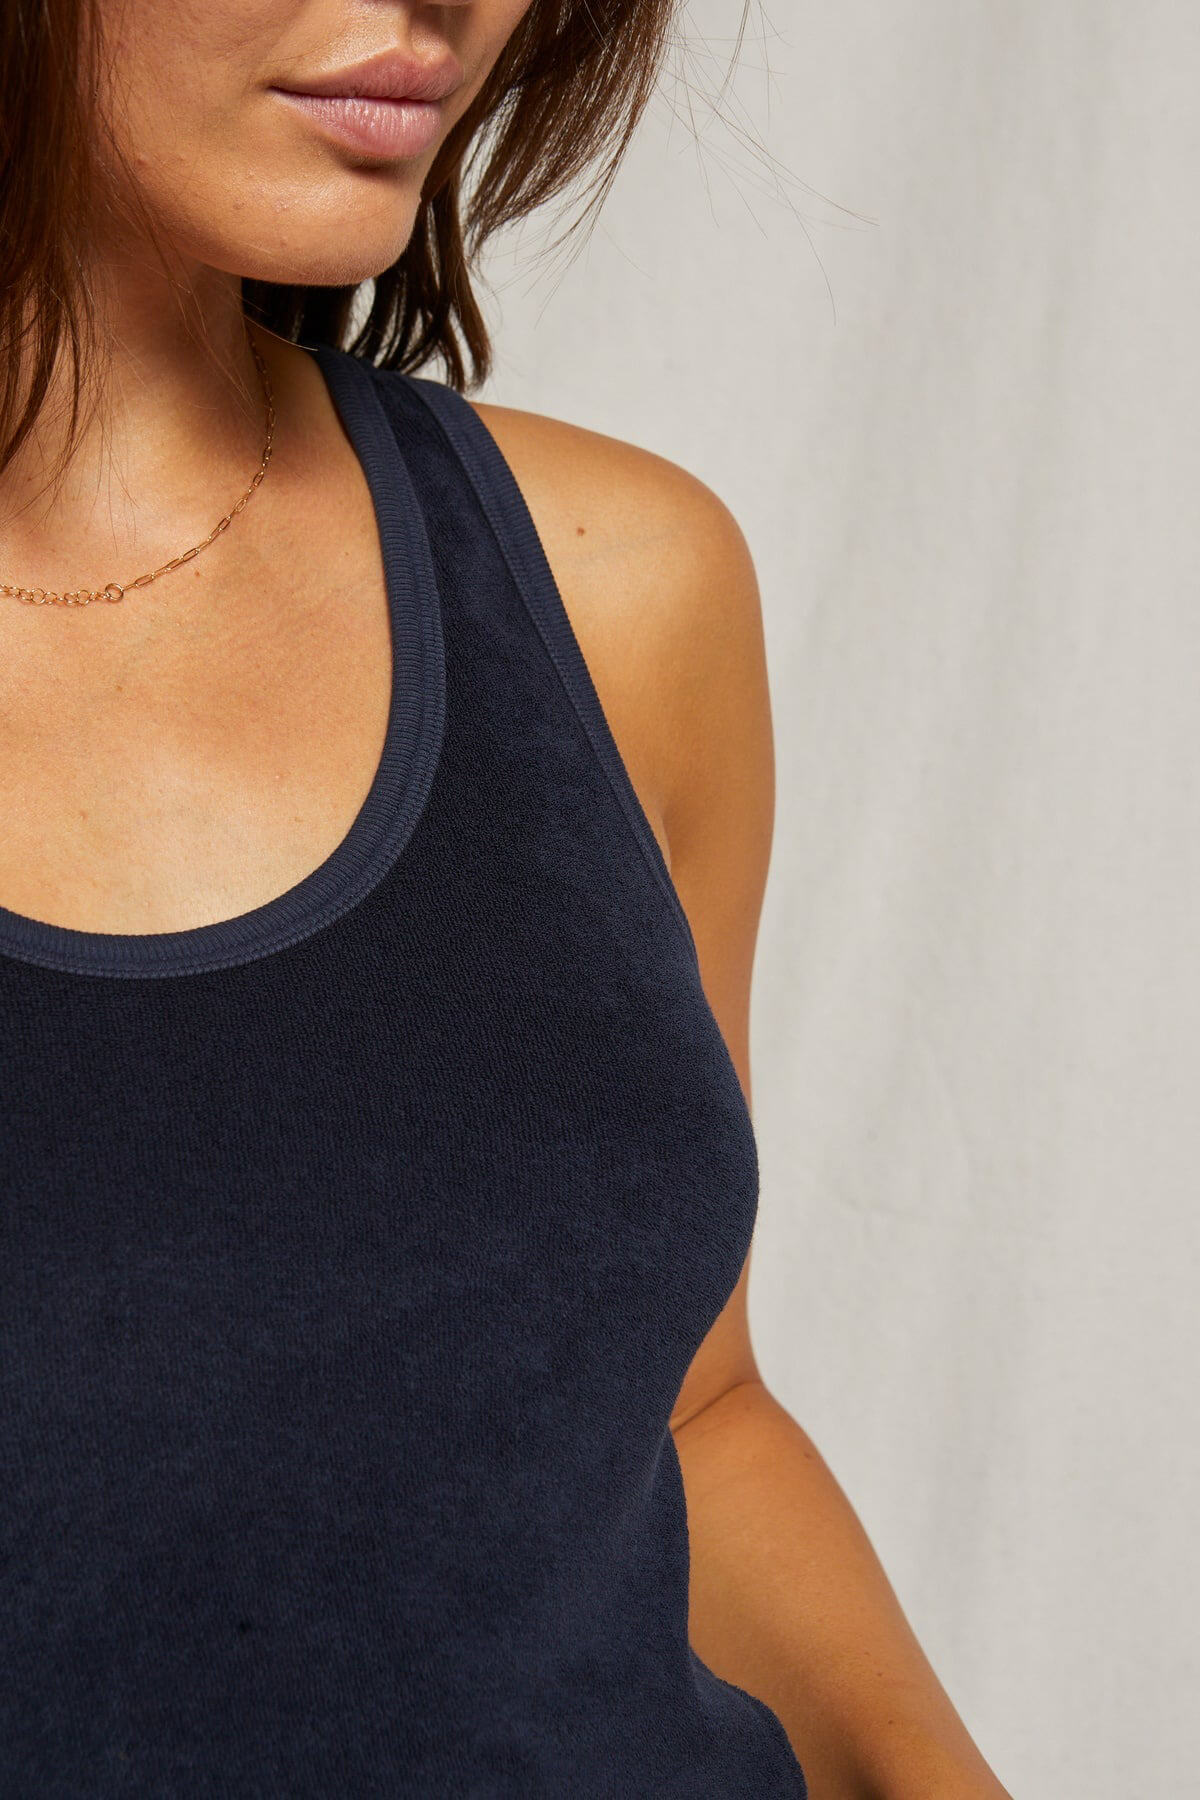 Perfect White Tee cruise terry tank in navy